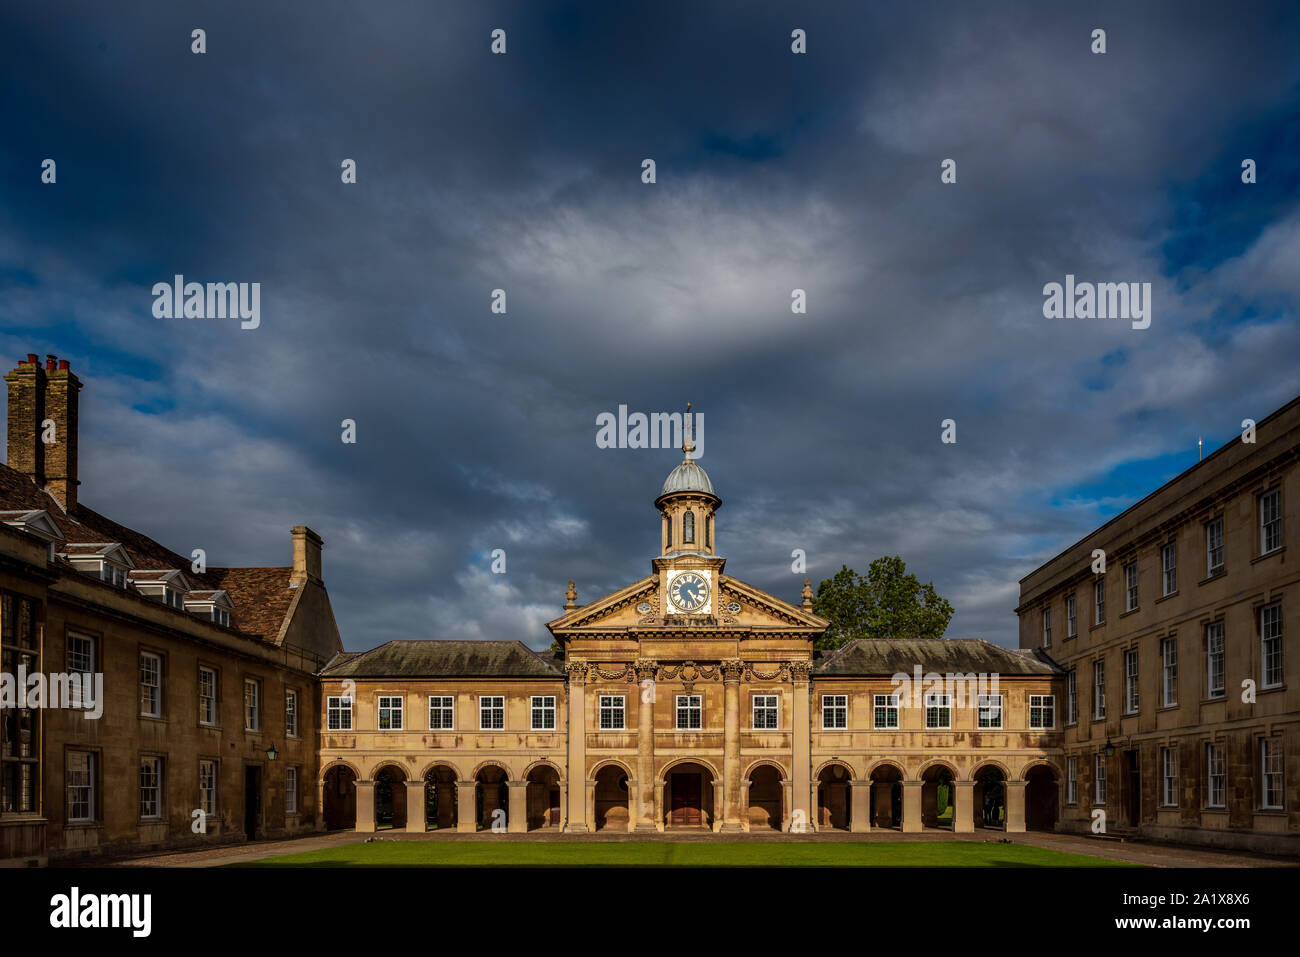 The Clocktower and Front Court at Emmanuel College, Cambridge University. The college was founded in 1584. Architect: Christopher Wren. Stock Photo